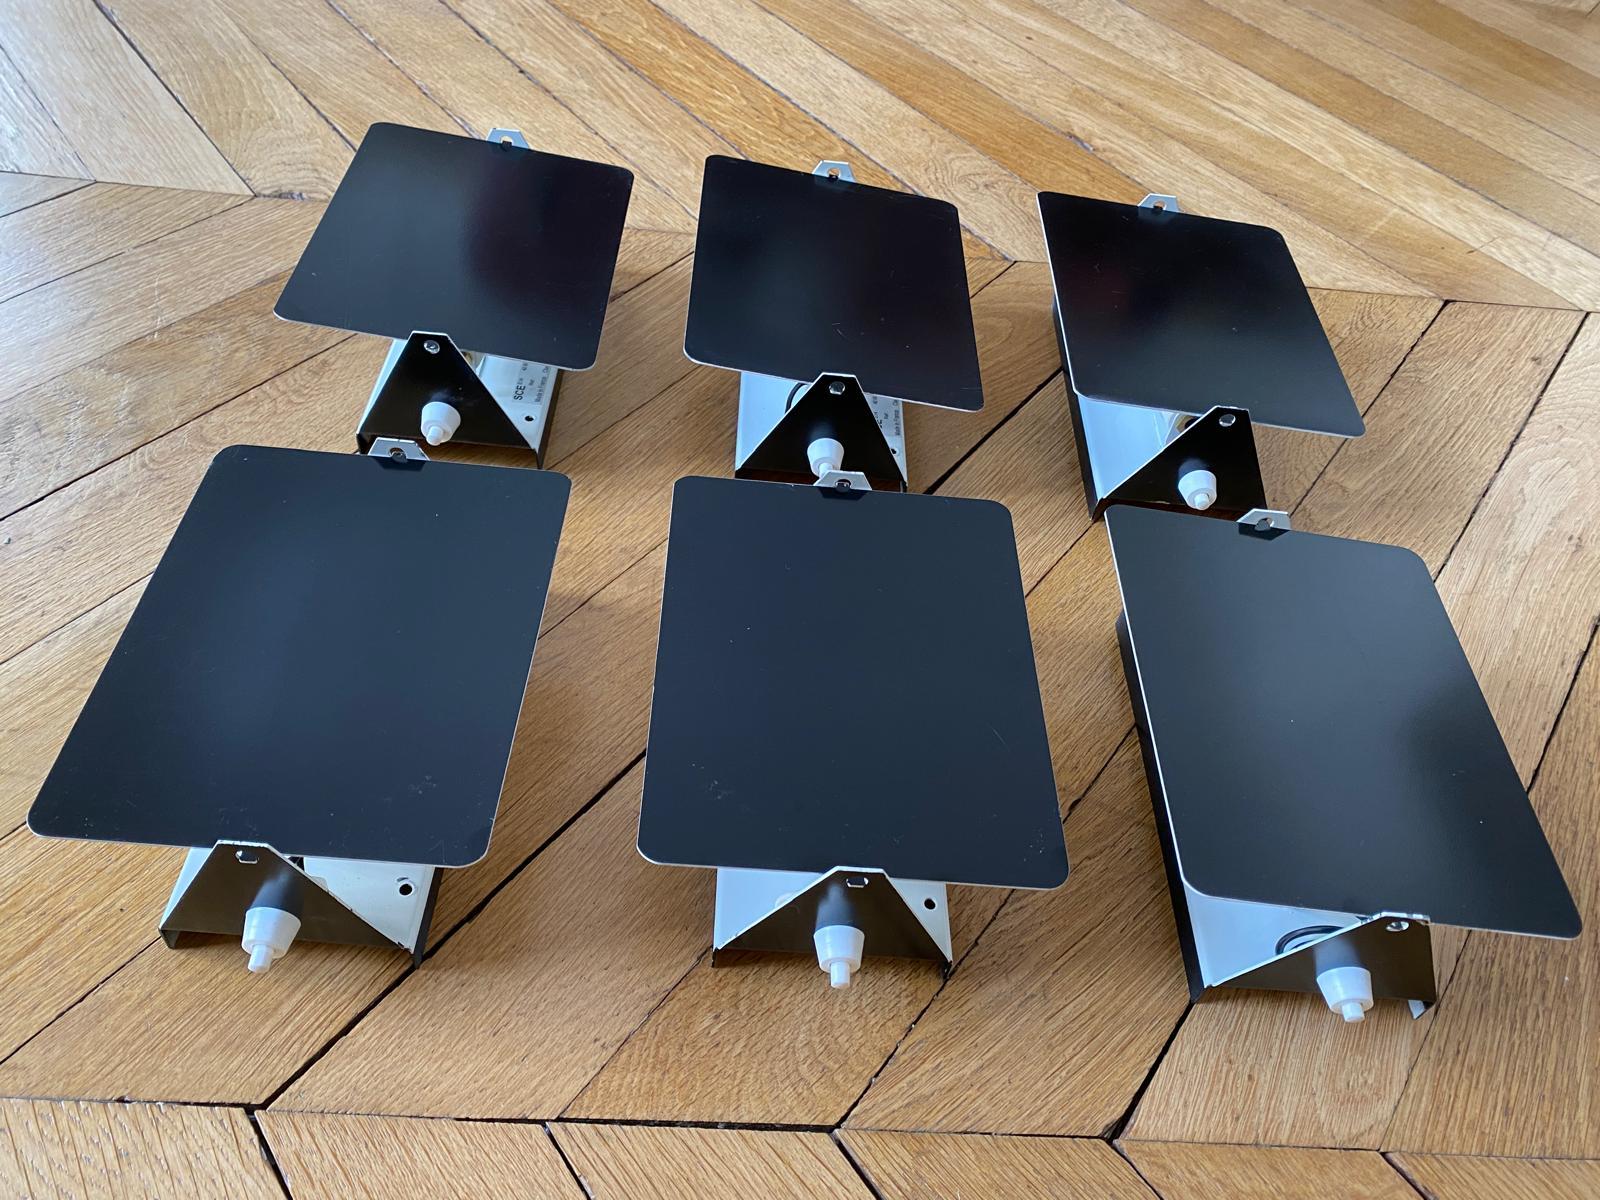 Charlotte Perriand CP1 iconic Black sconces. Designed for Les Arc ski resort in Savoy, France in 1962. They where produced by Steph Simon Gallery until the seventies. They are made of black painted metal and white metal on the back.
Total 6